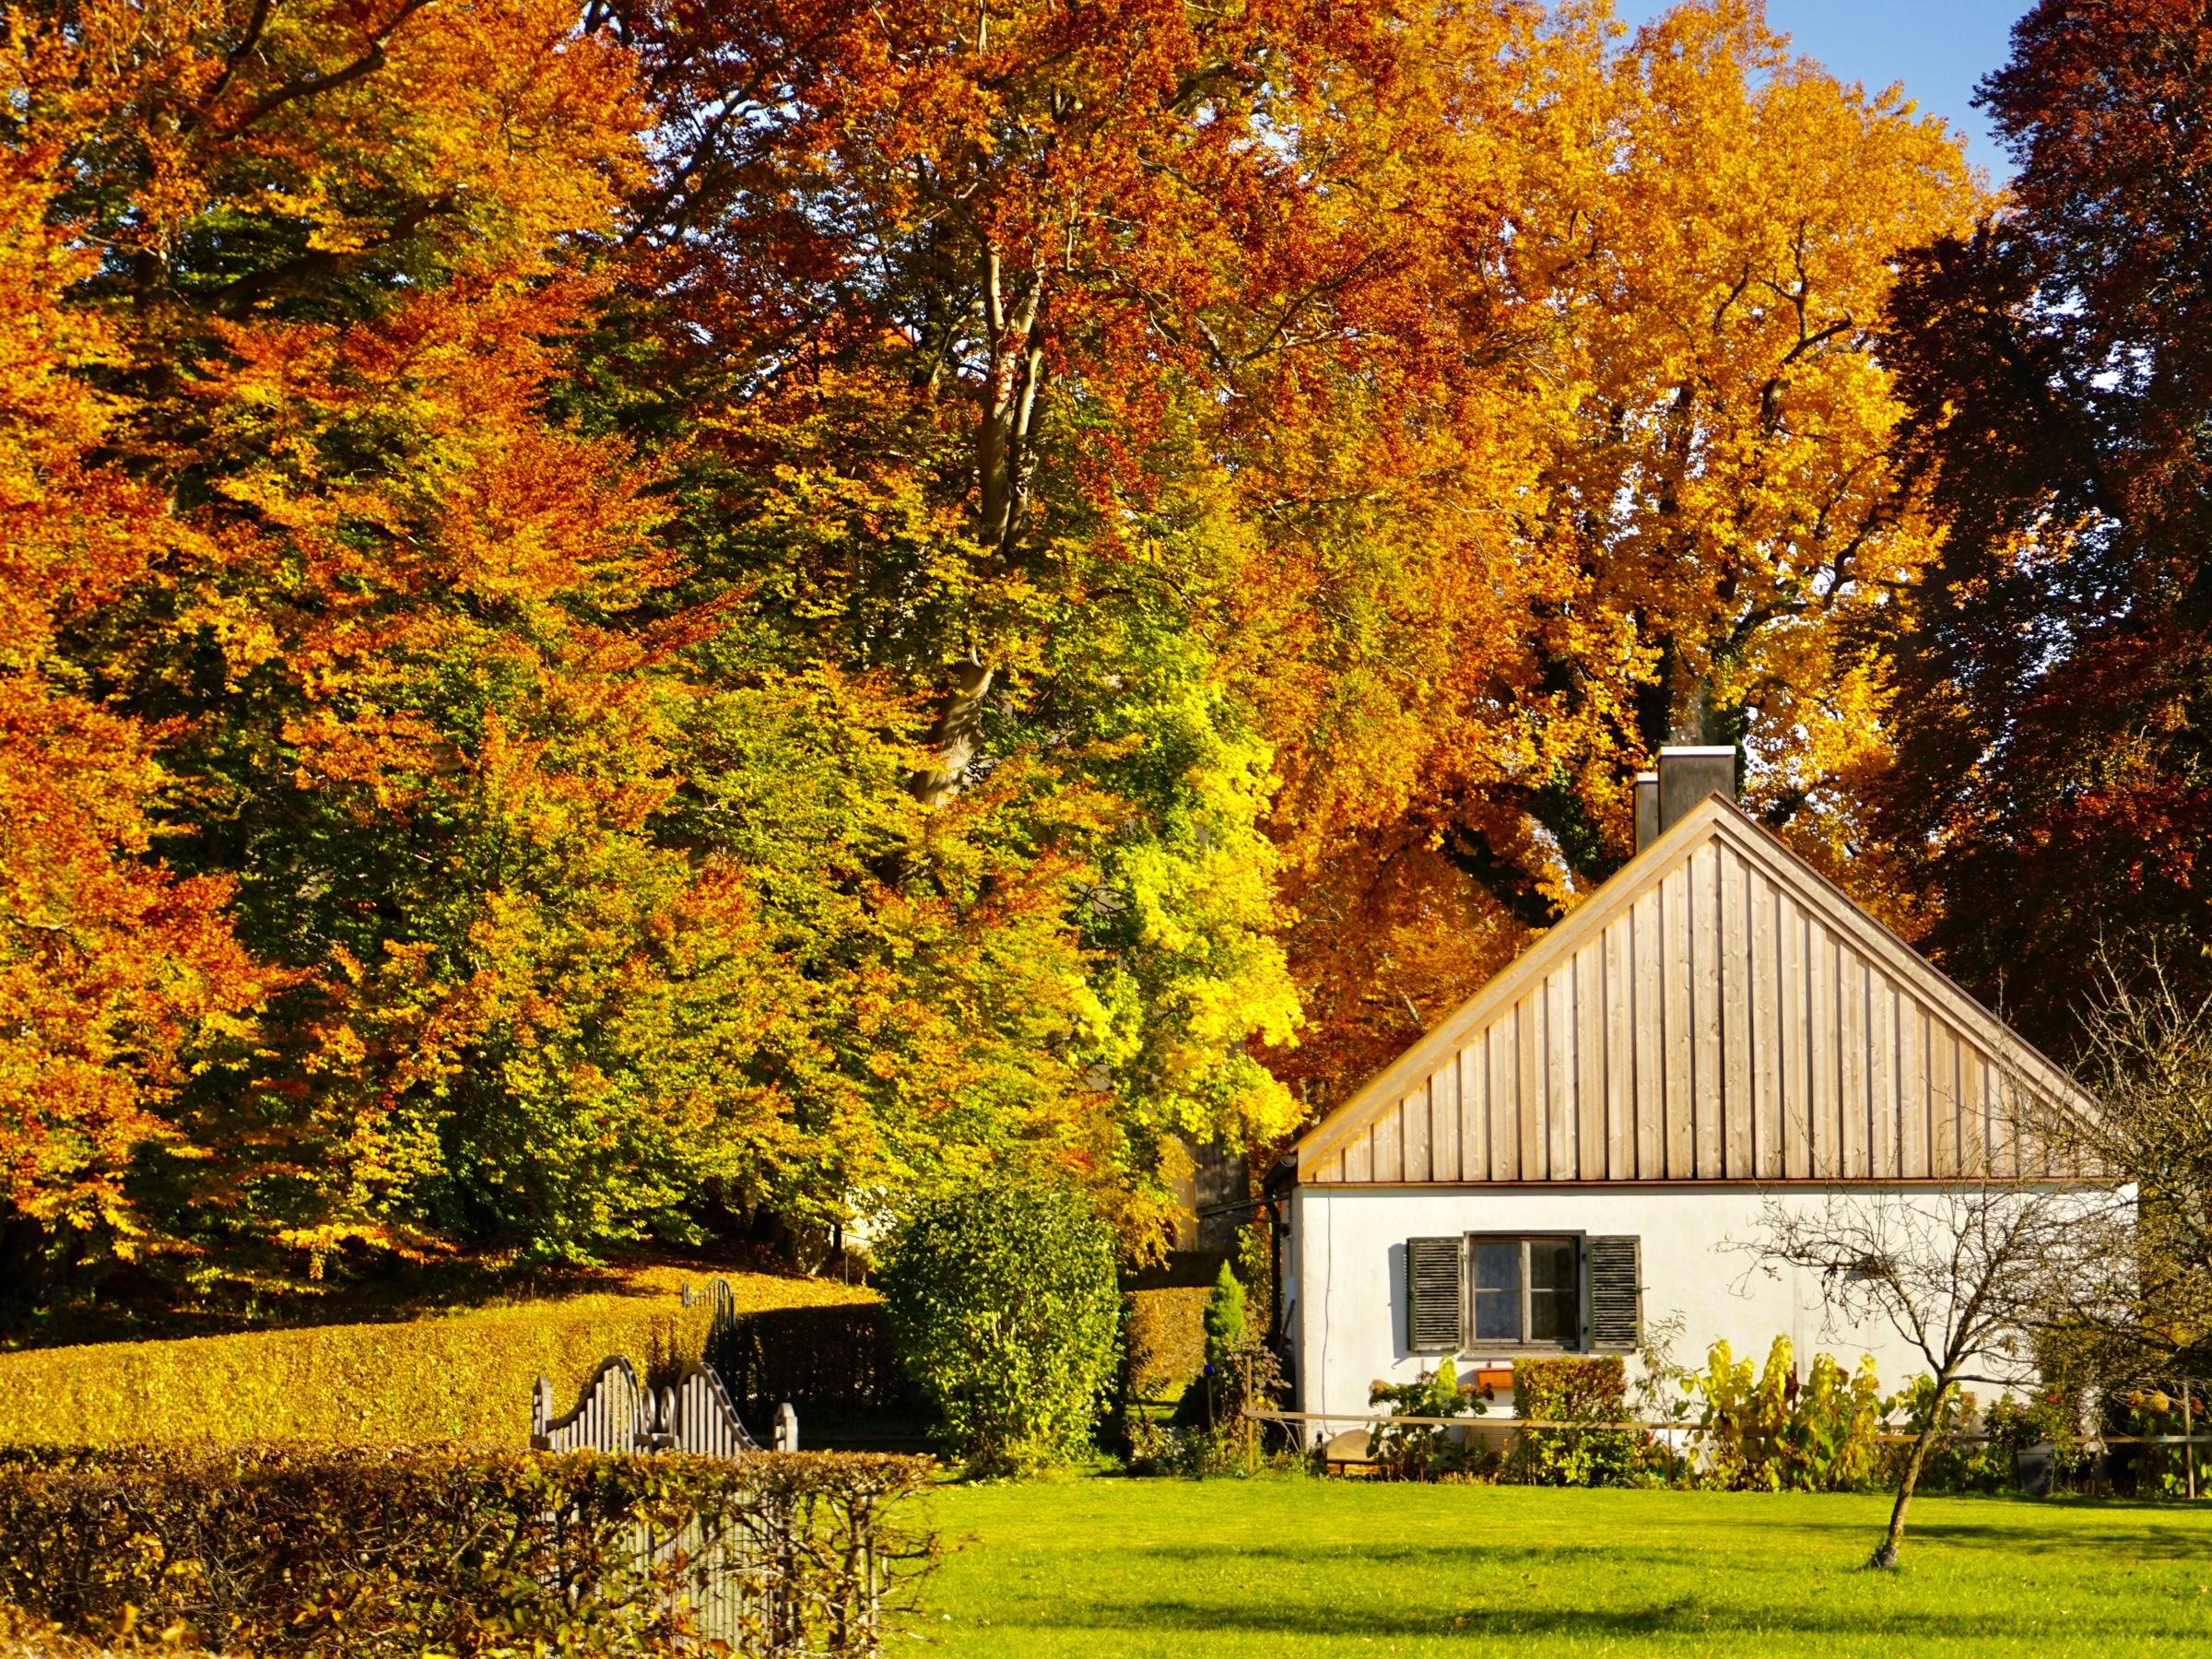 Autumn guide: How to get your summer house ready